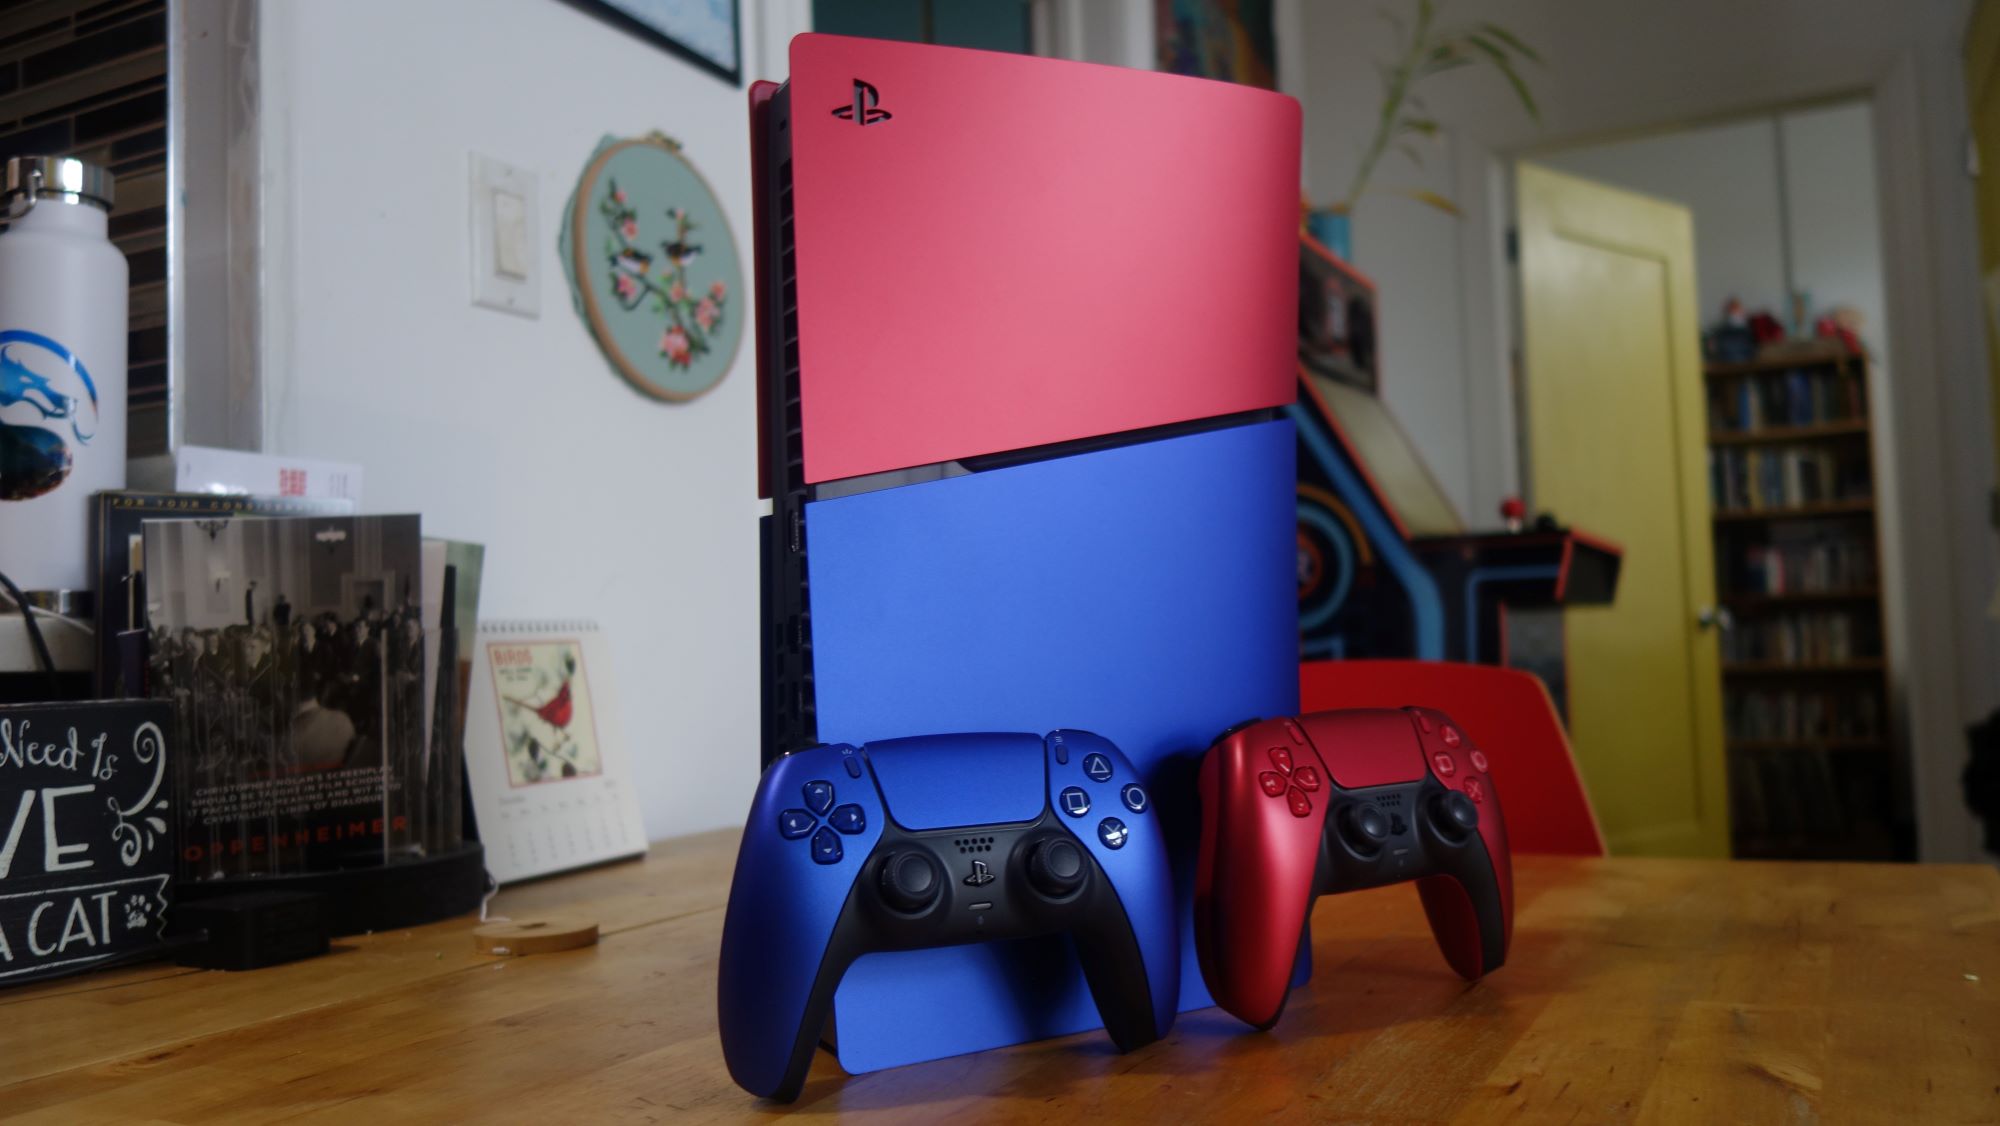 New PS5 Slim pictures show just how small the updated console is - Dexerto